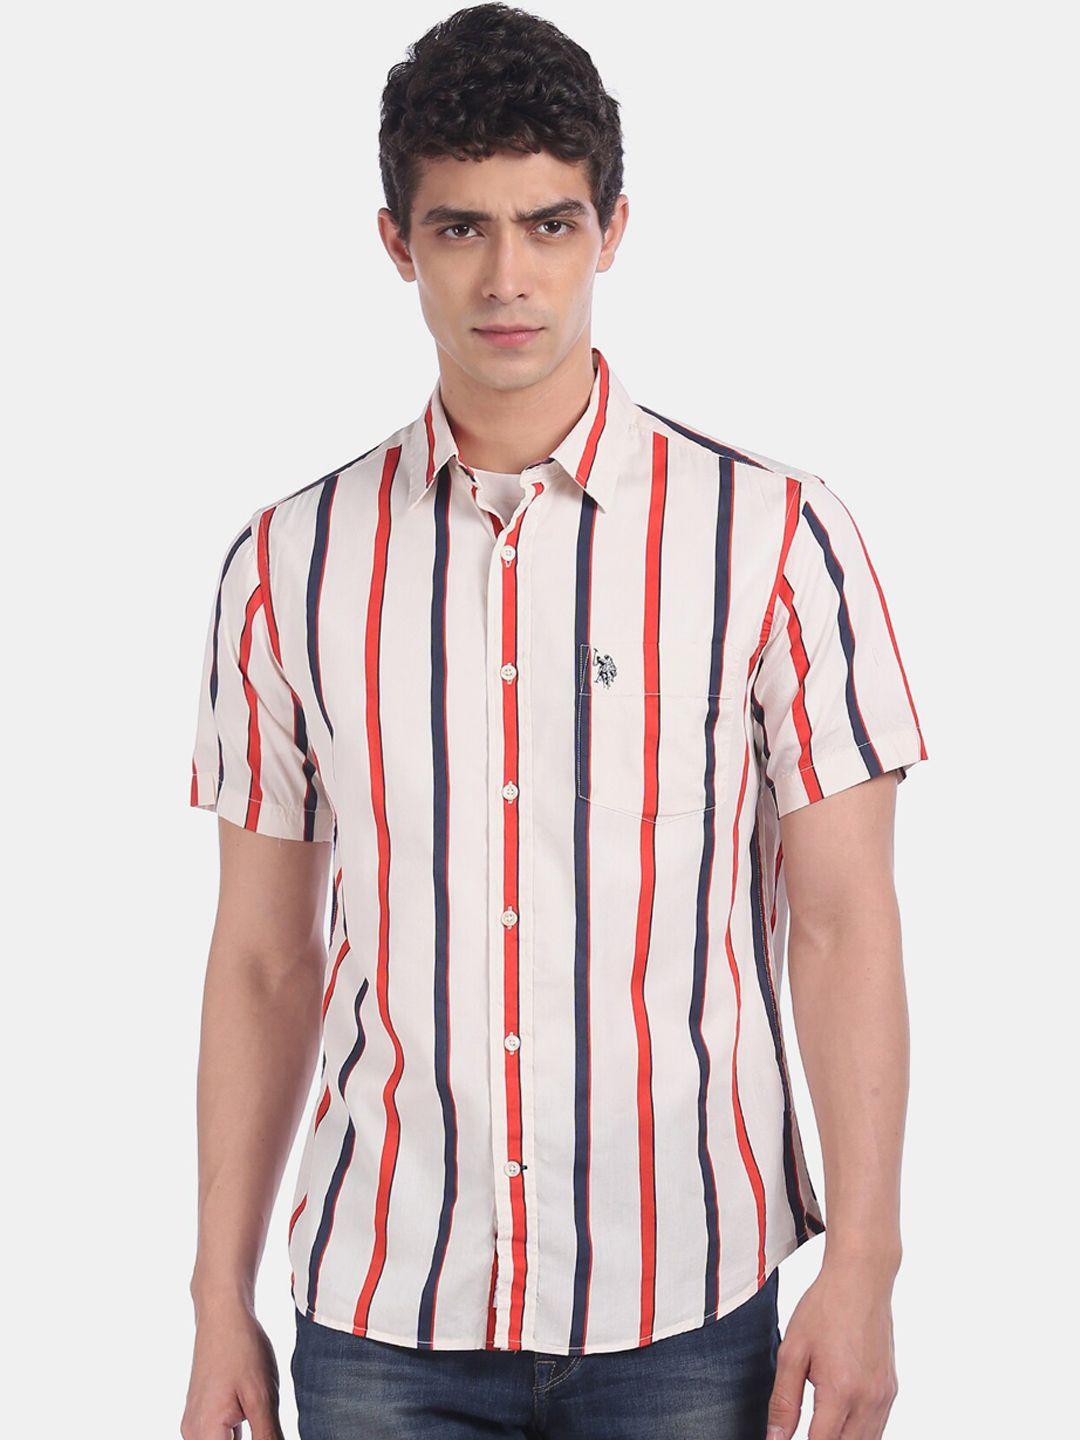 u.s.-polo-assn.-men-off-white-&-red-regular-fit-striped-casual-shirt